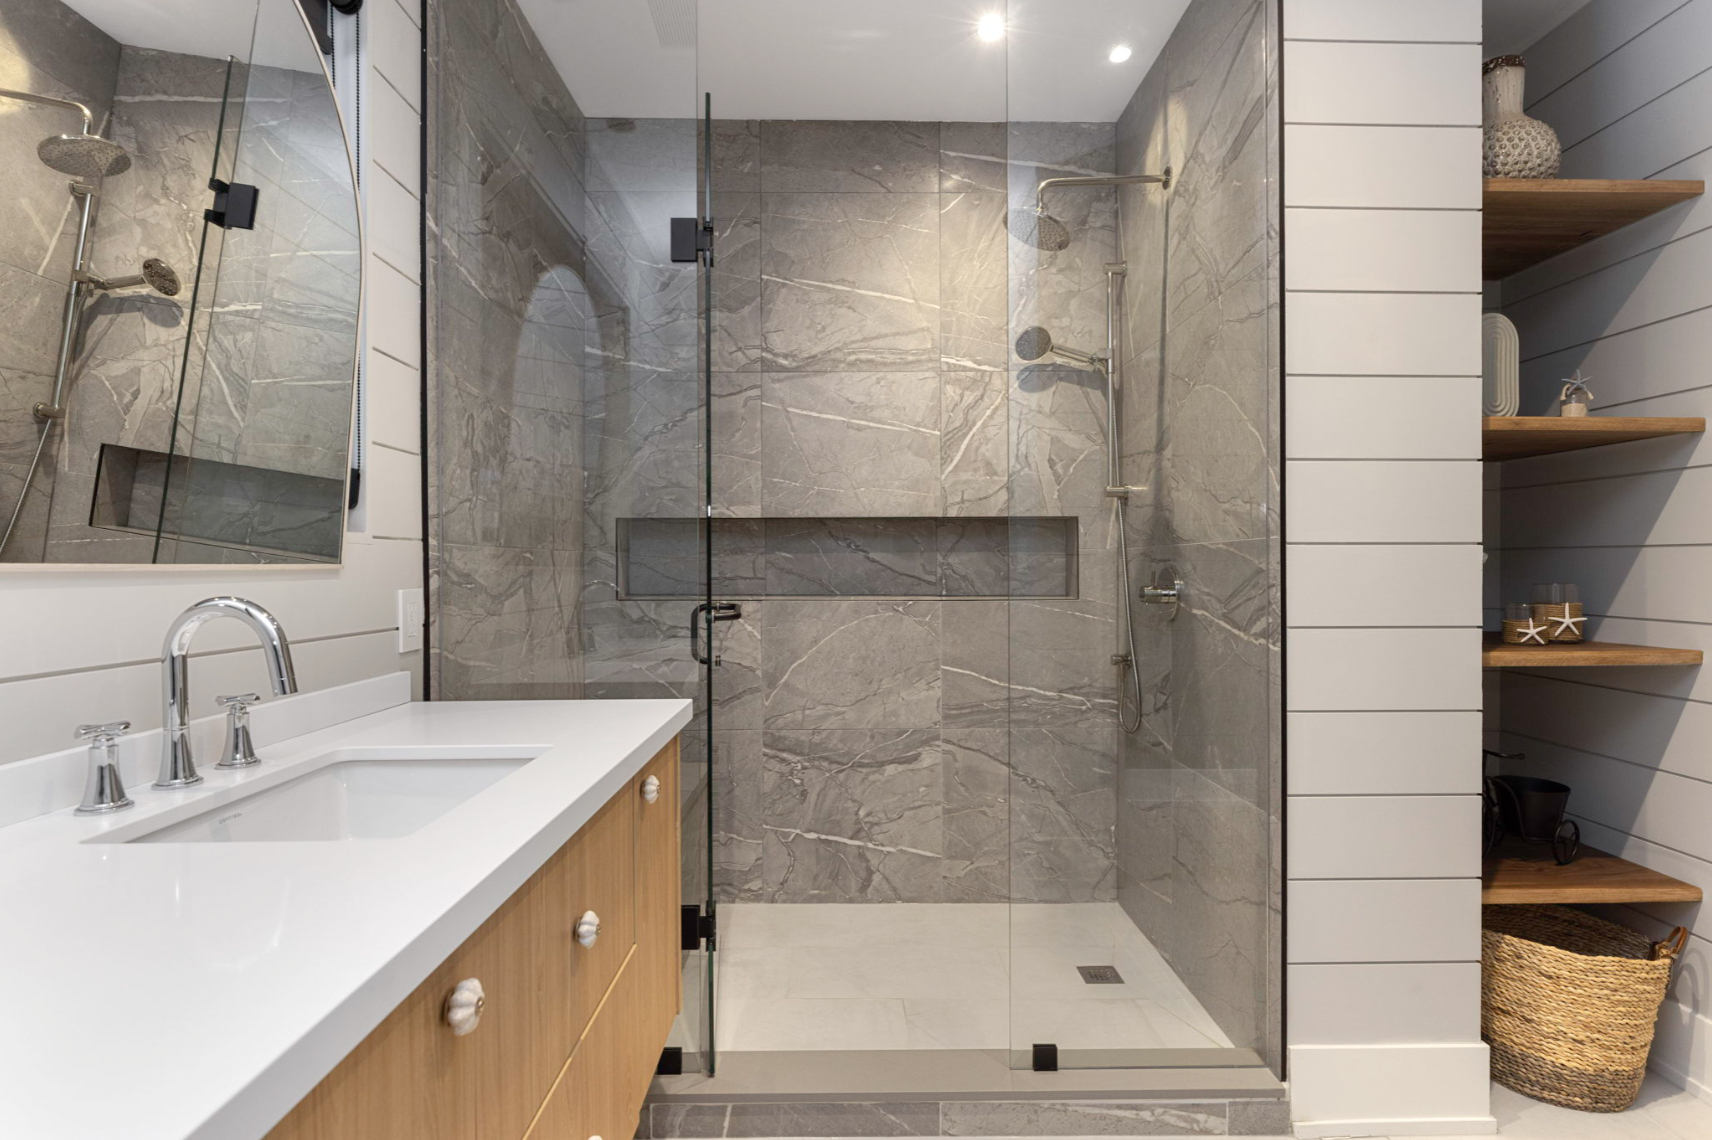 The dramatic stone shower in the ensuite is a nice touch. 